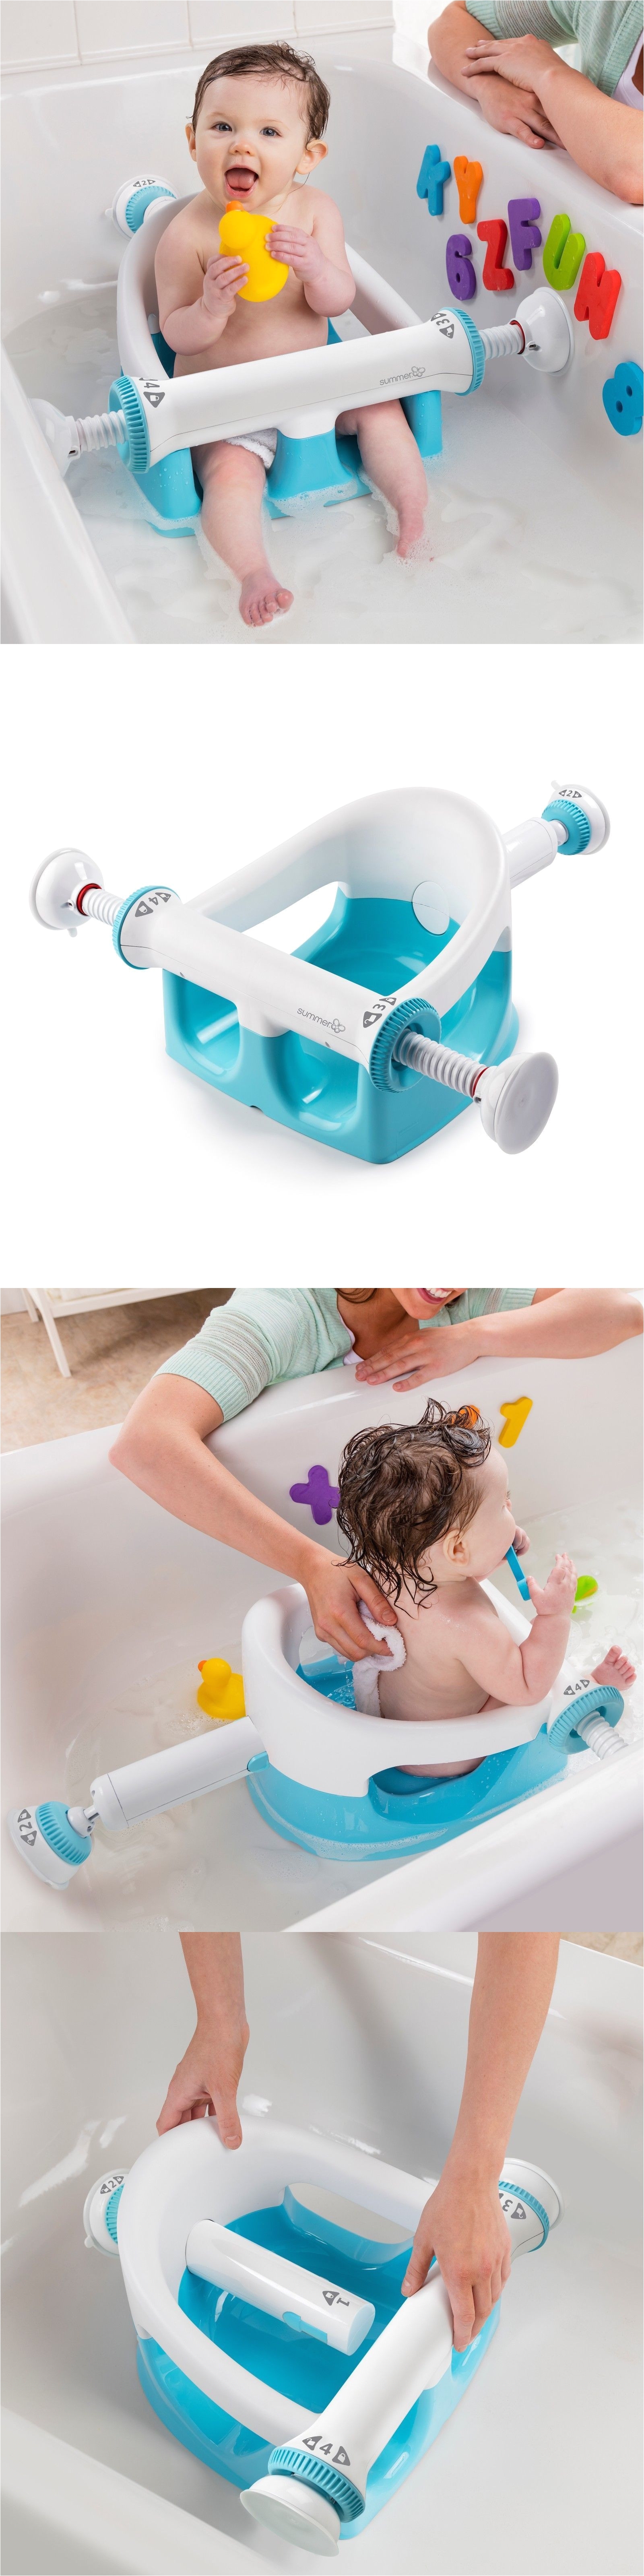 inflatable bathtub lovely summer infant baby bath seat super safety toddler chair non slip